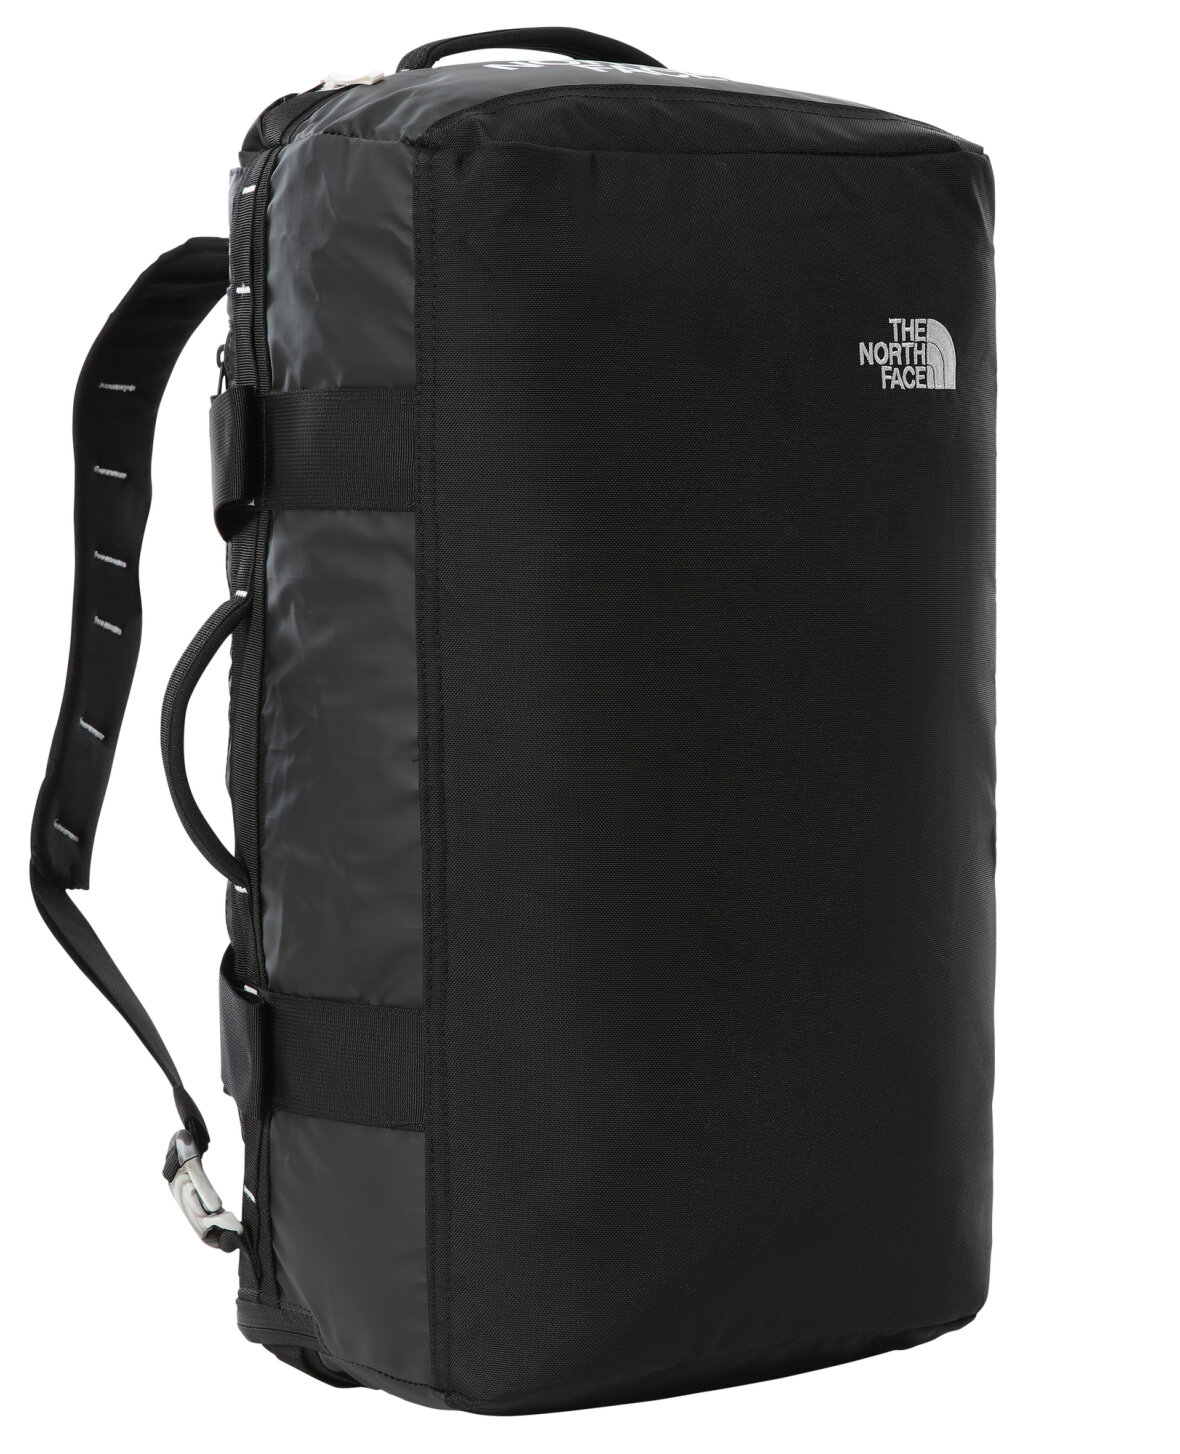 OUTDOOR - THE NORTH FACE - BASE CAMP VOYAGER DUFFEL 42L